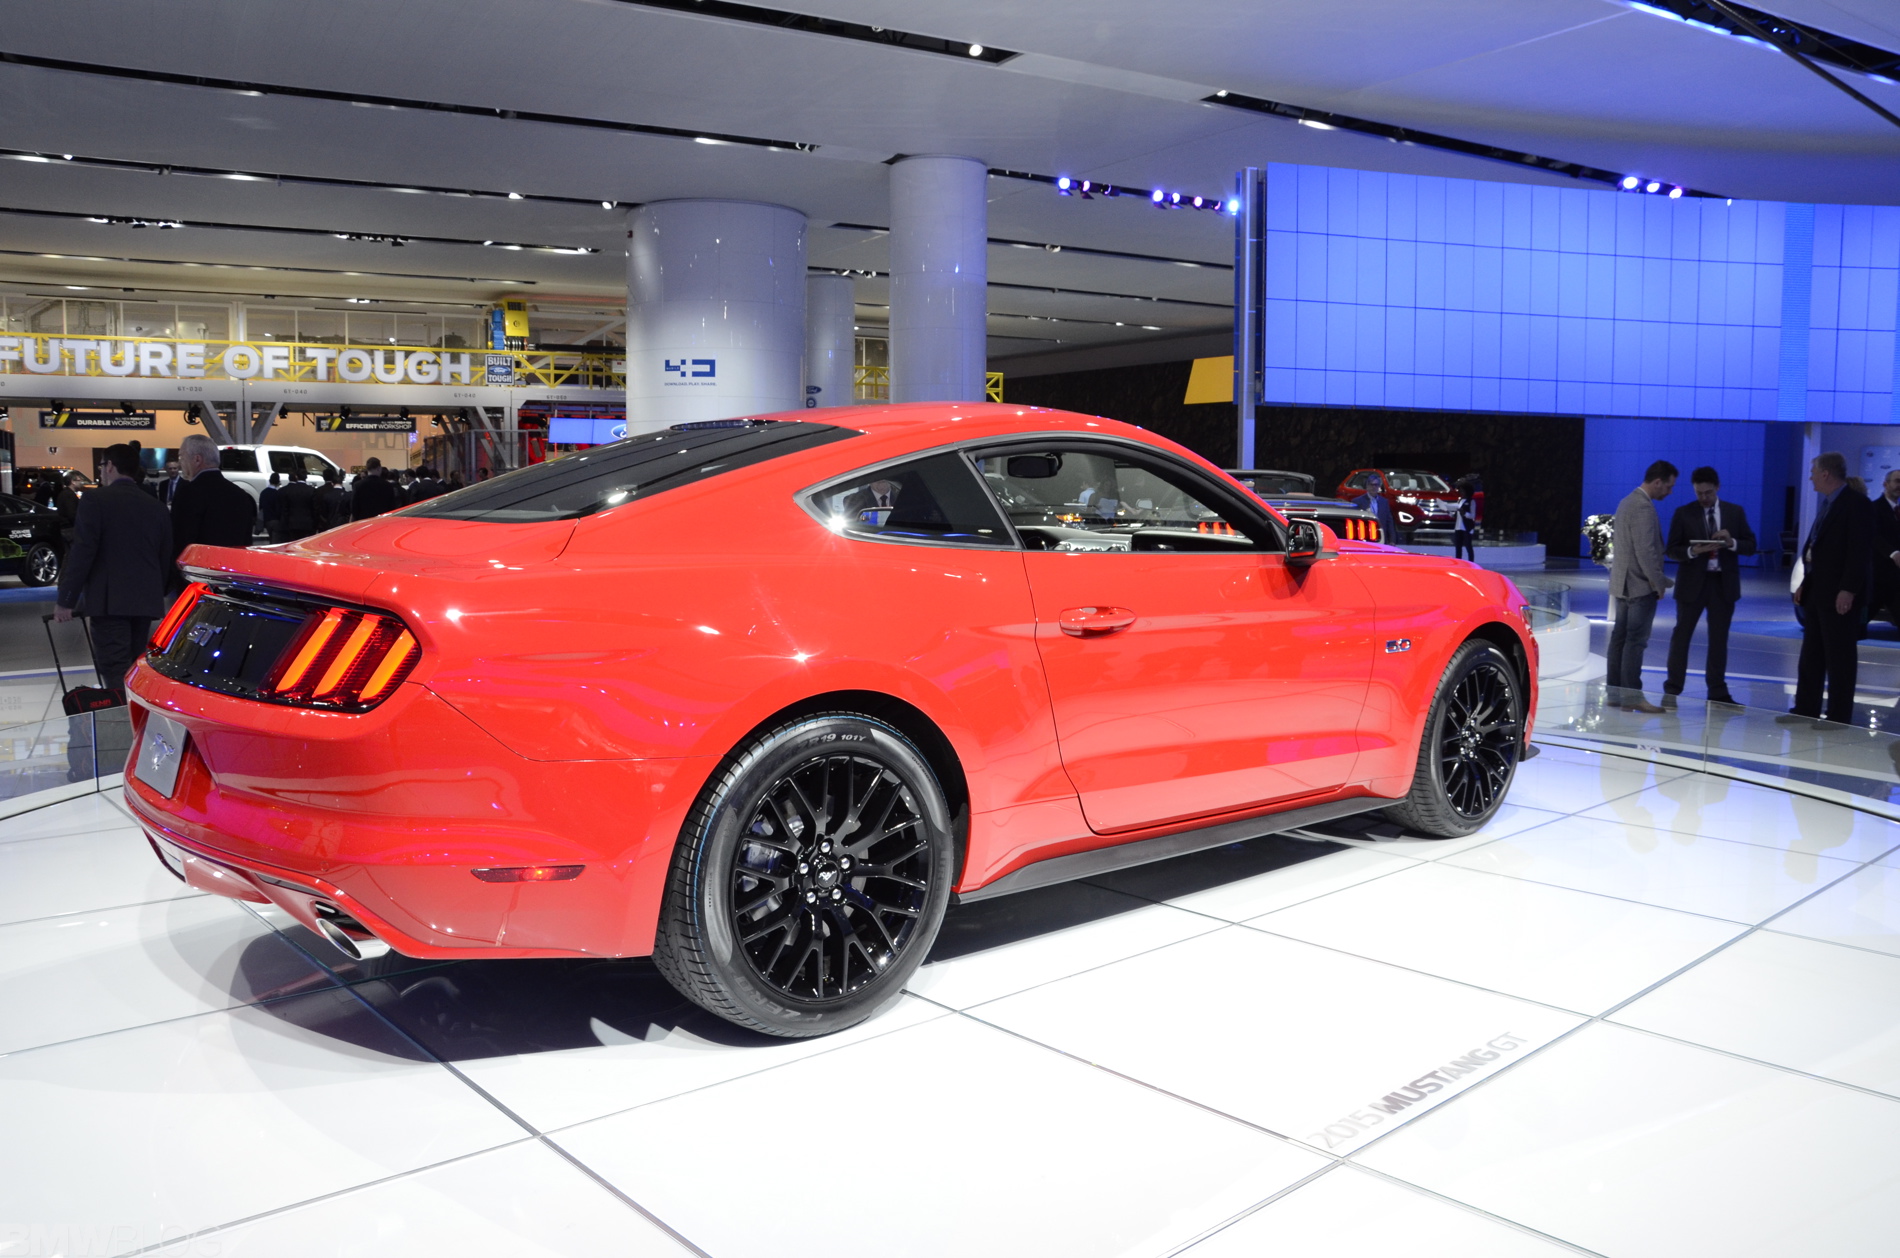 2015 Ford mustang detroit auto show #10